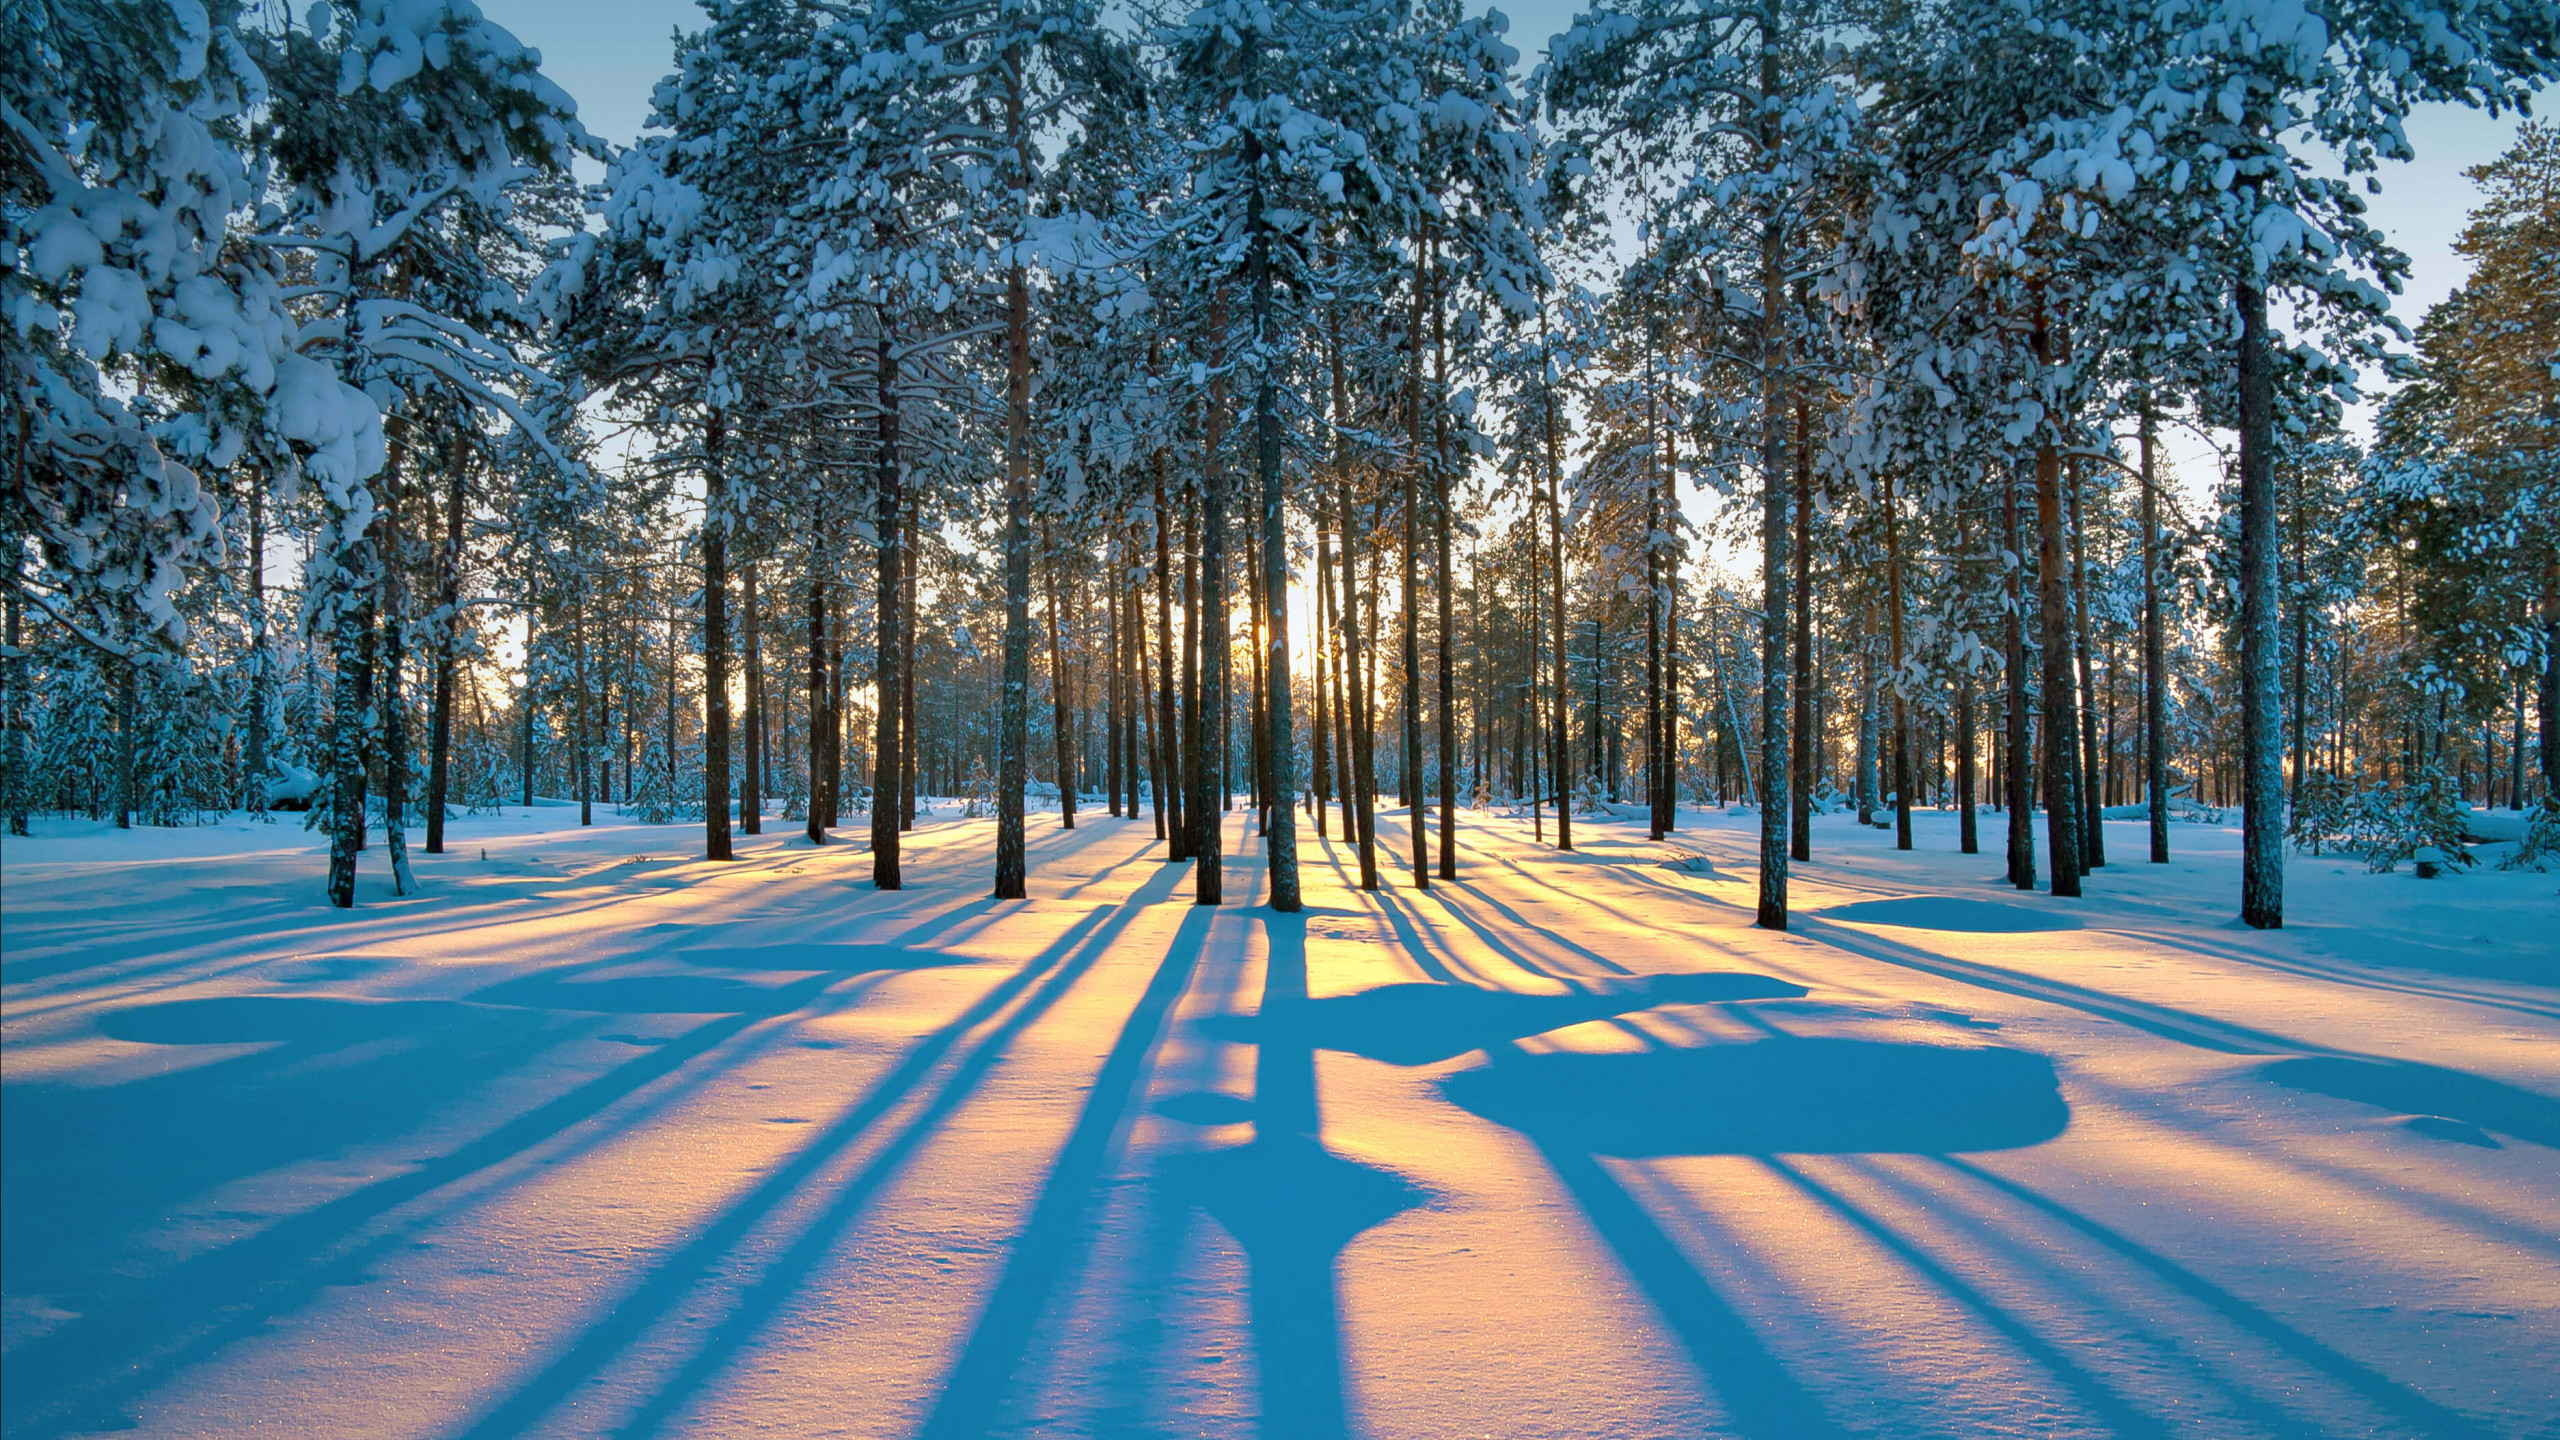 Snow Forest Wallpaper Images - Free Download on Freepik